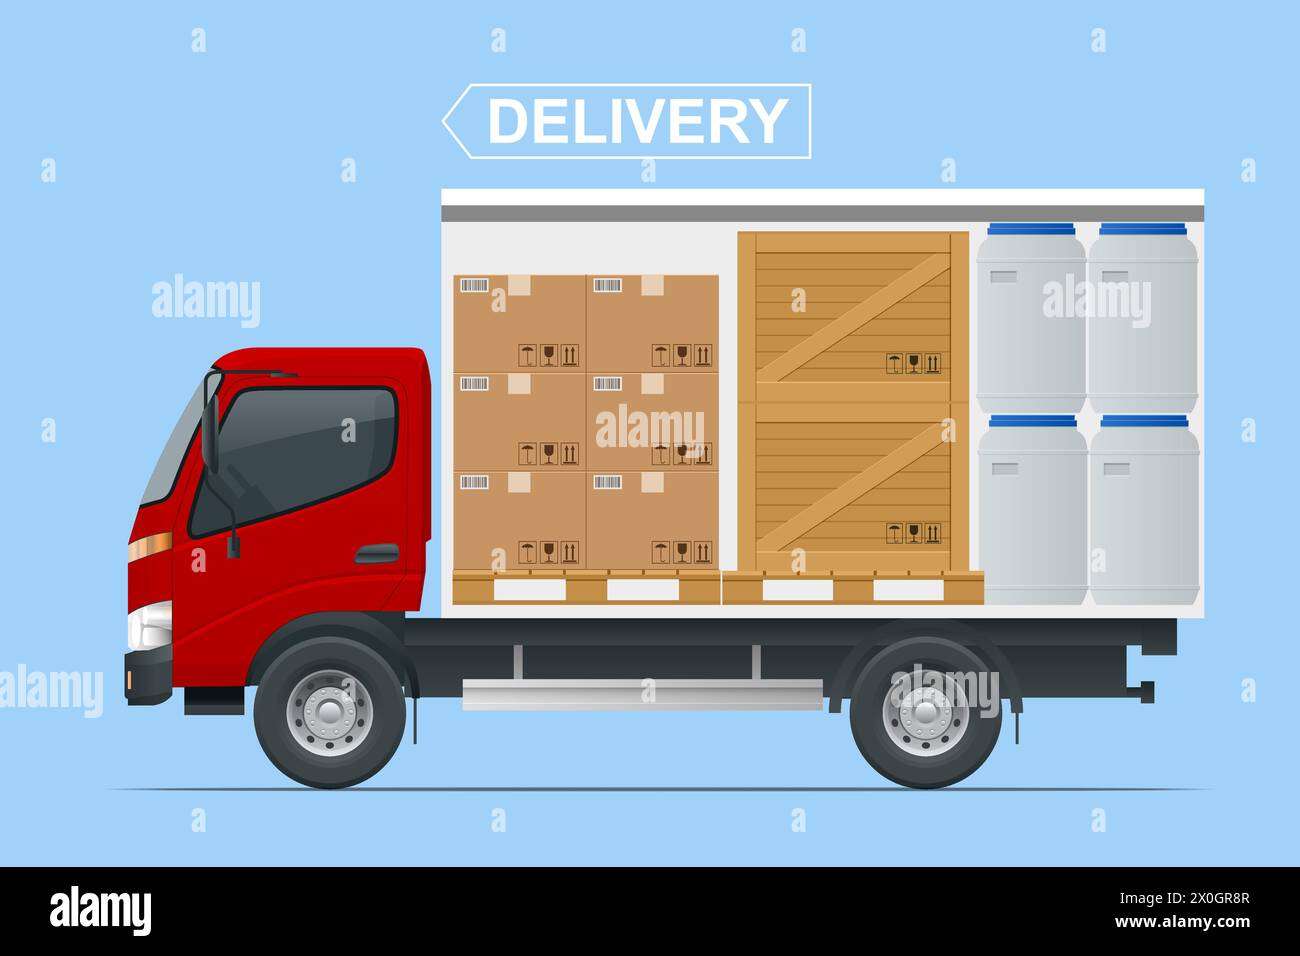 Full truckload, Shipping, Logistic Systems, Cargo Transport. Cargo Truck transportation, delivery, boxes. Delivery and shipping business cargo truck. Stock Vector